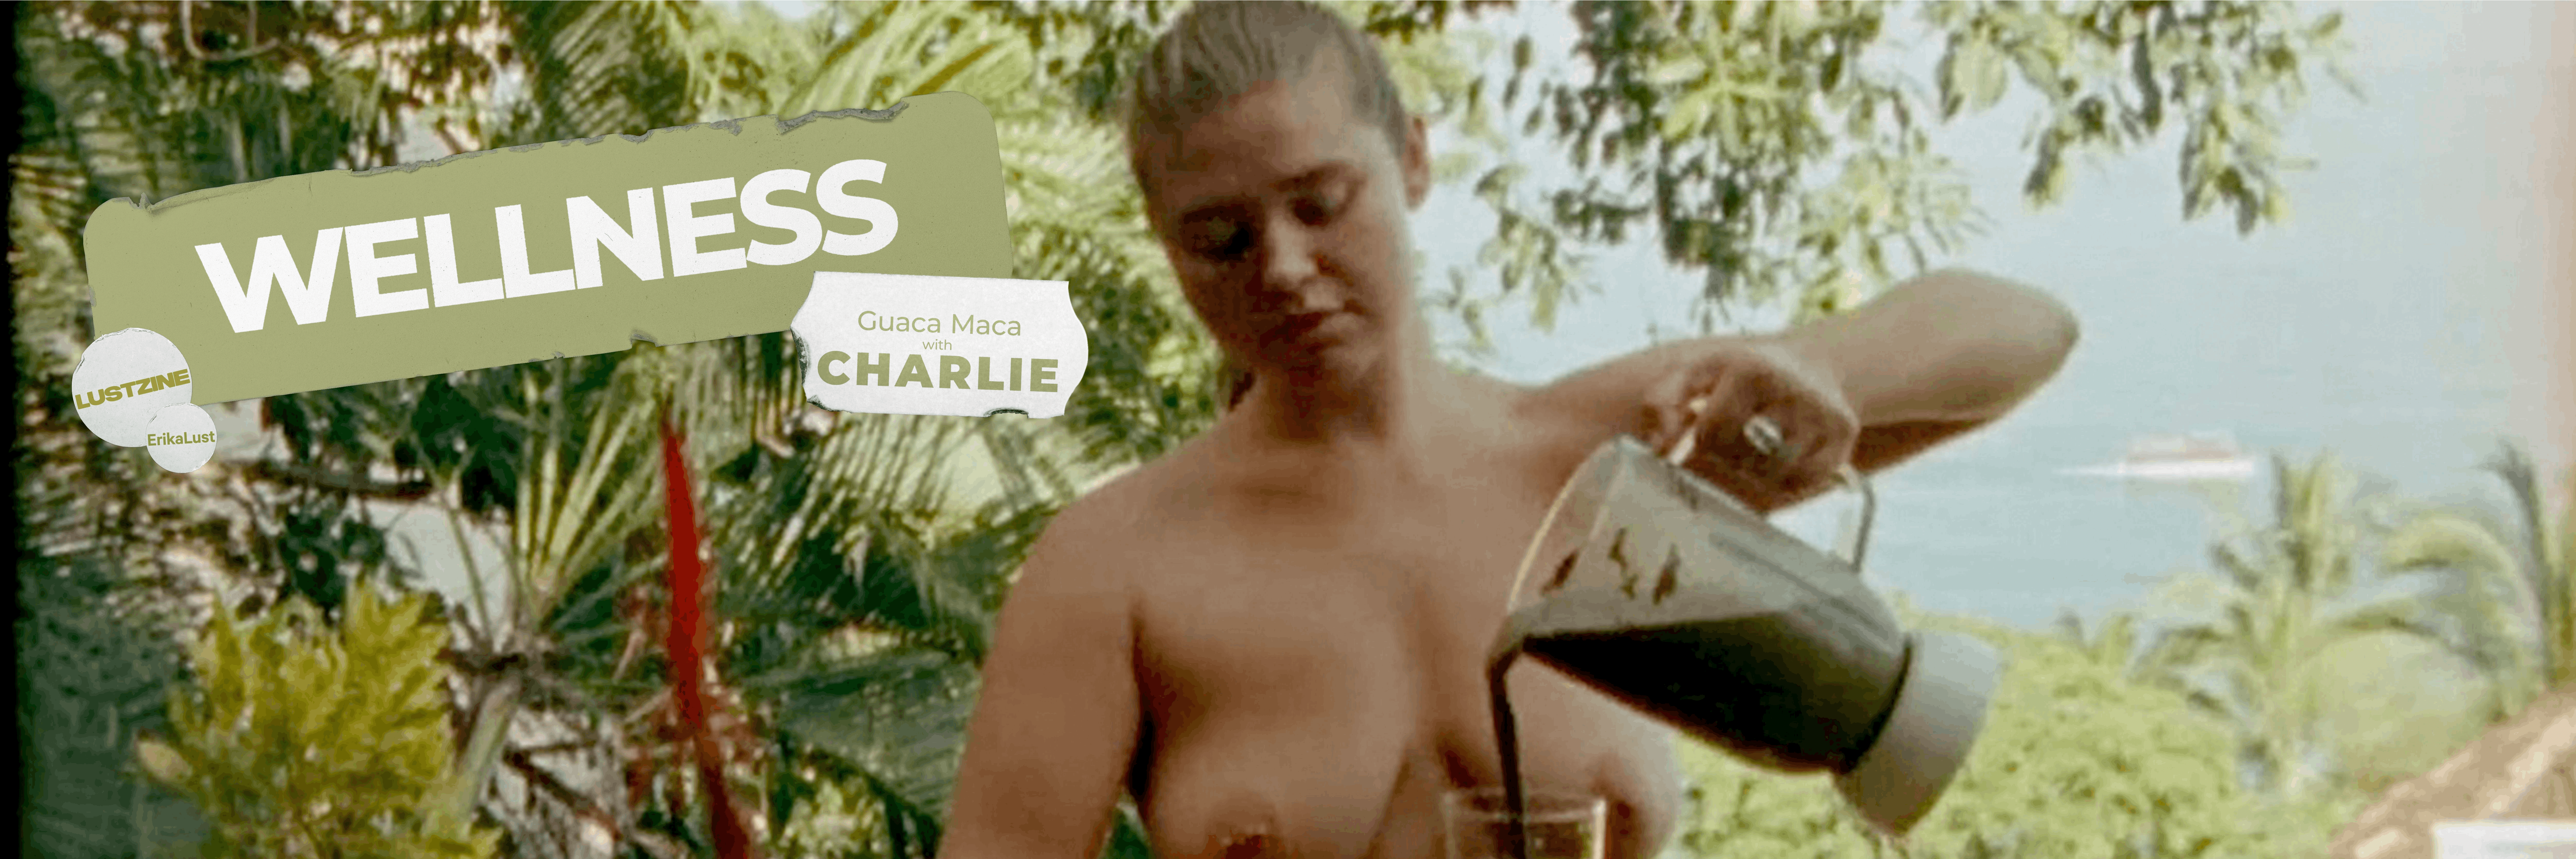 Lust Zine Wellness Series cooking naked with Charlie Max